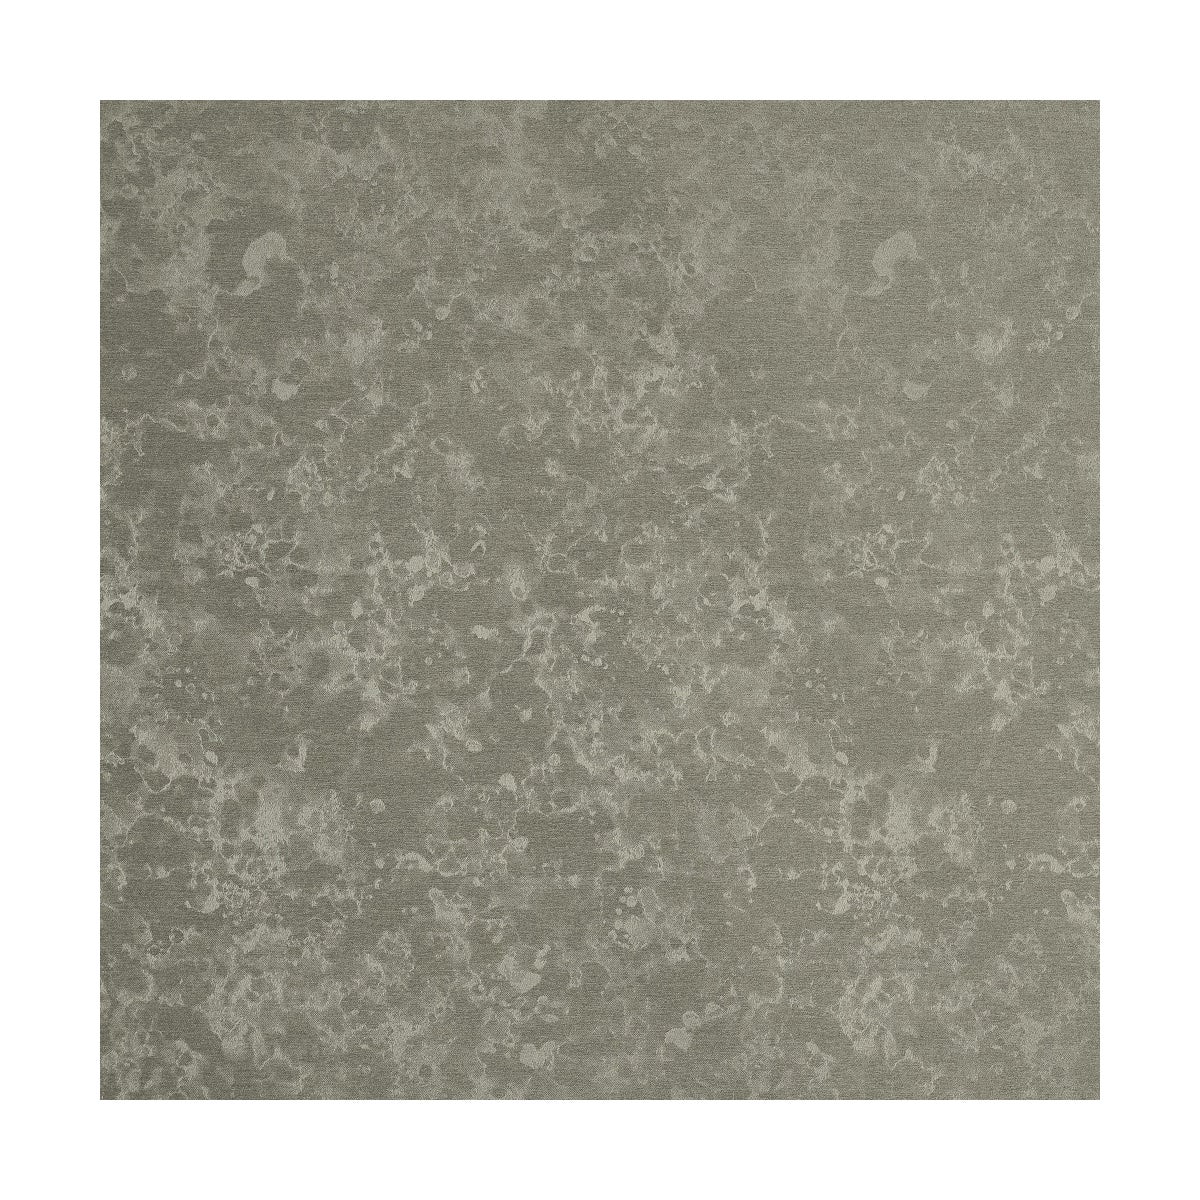 Obira * - Silver - Fabric By the Yard